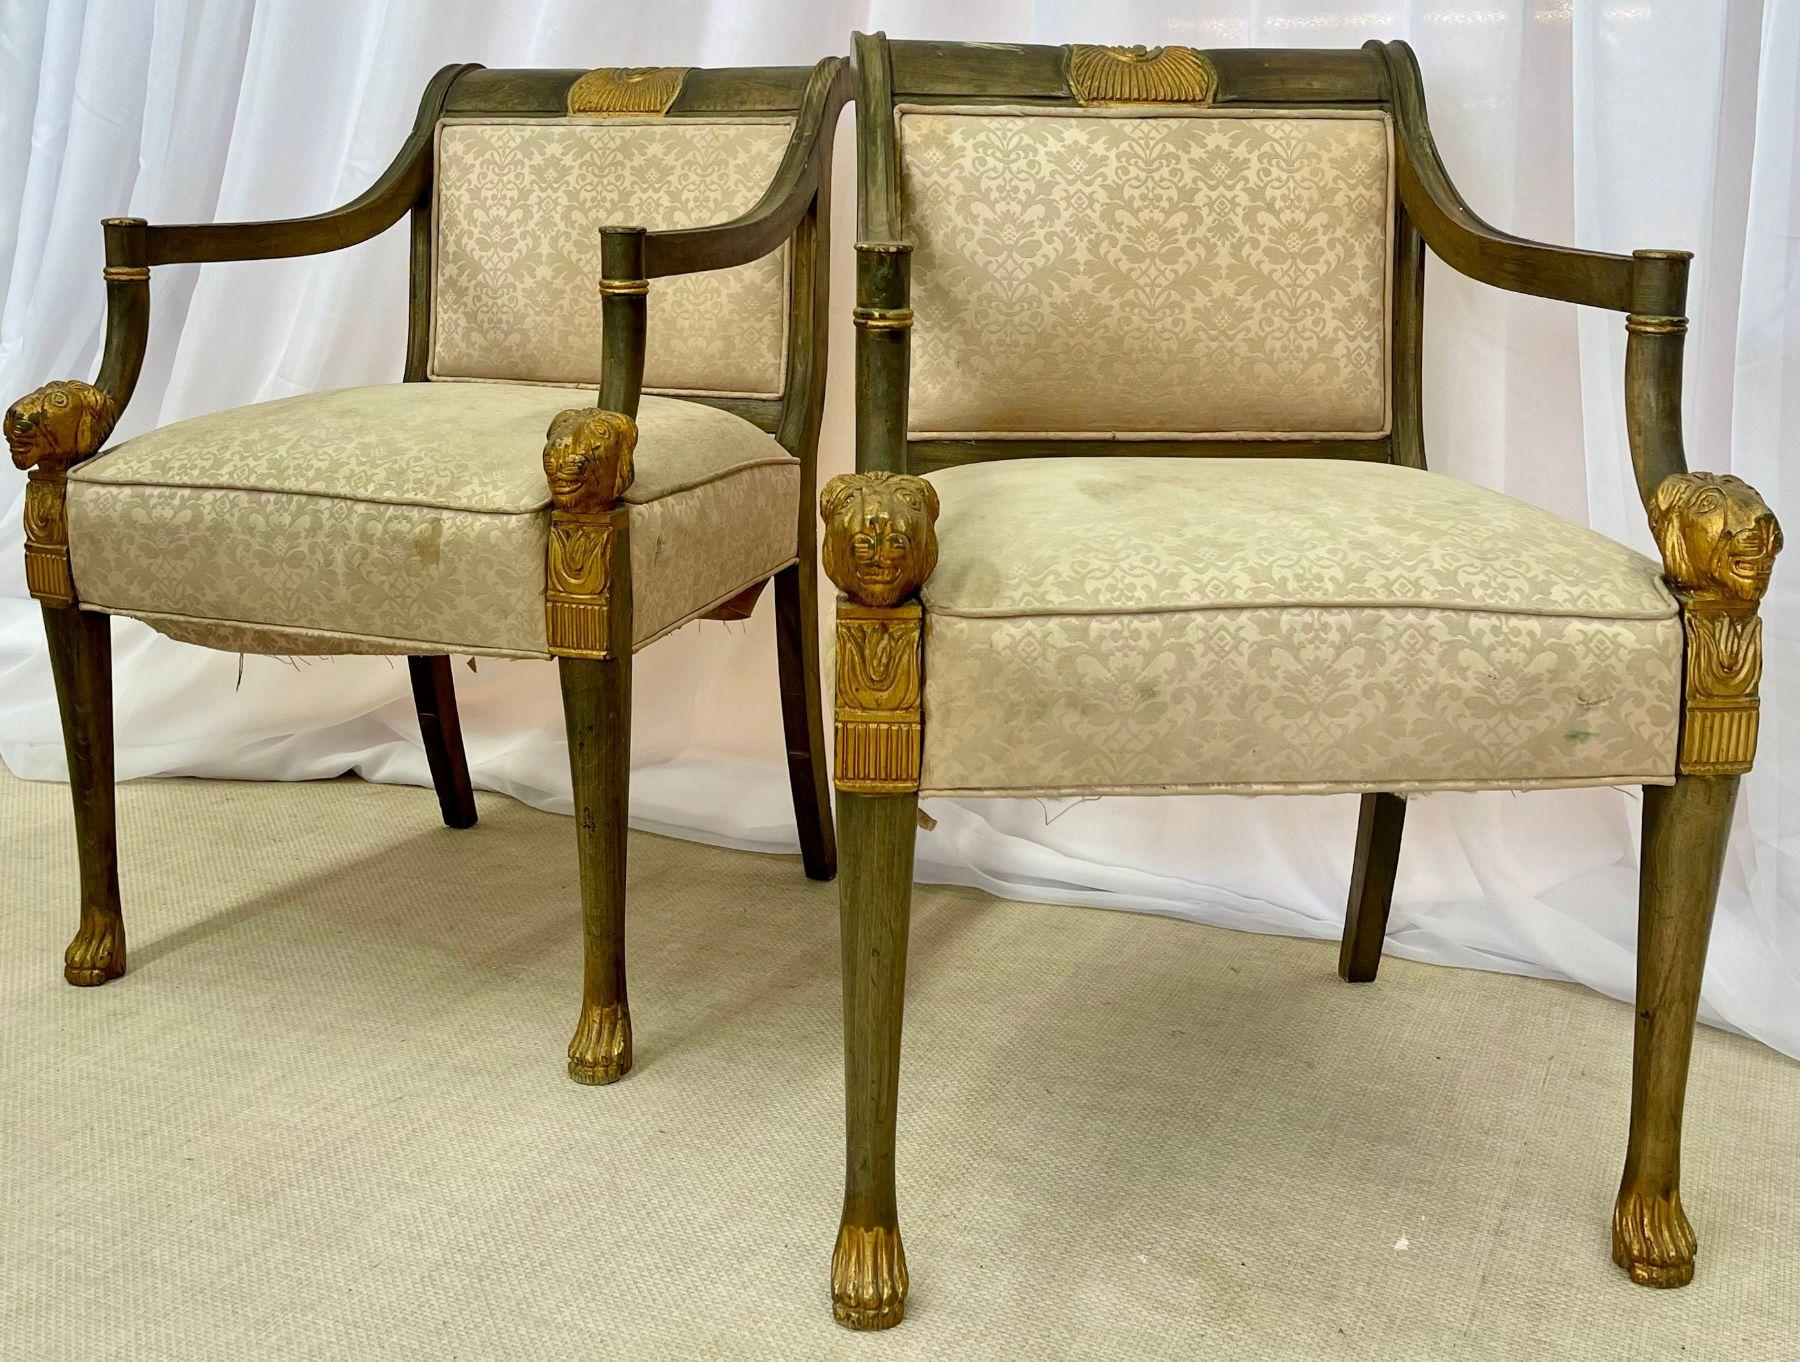 19th century Swedish neoclassical arm chairs. 

A pair of finely carved parcel gilt and paint decorated arm chairs or fauteuils. Each having gilt claw feet with intricately detailed gilt lion heads at the end of the arm rests. The frame is painted